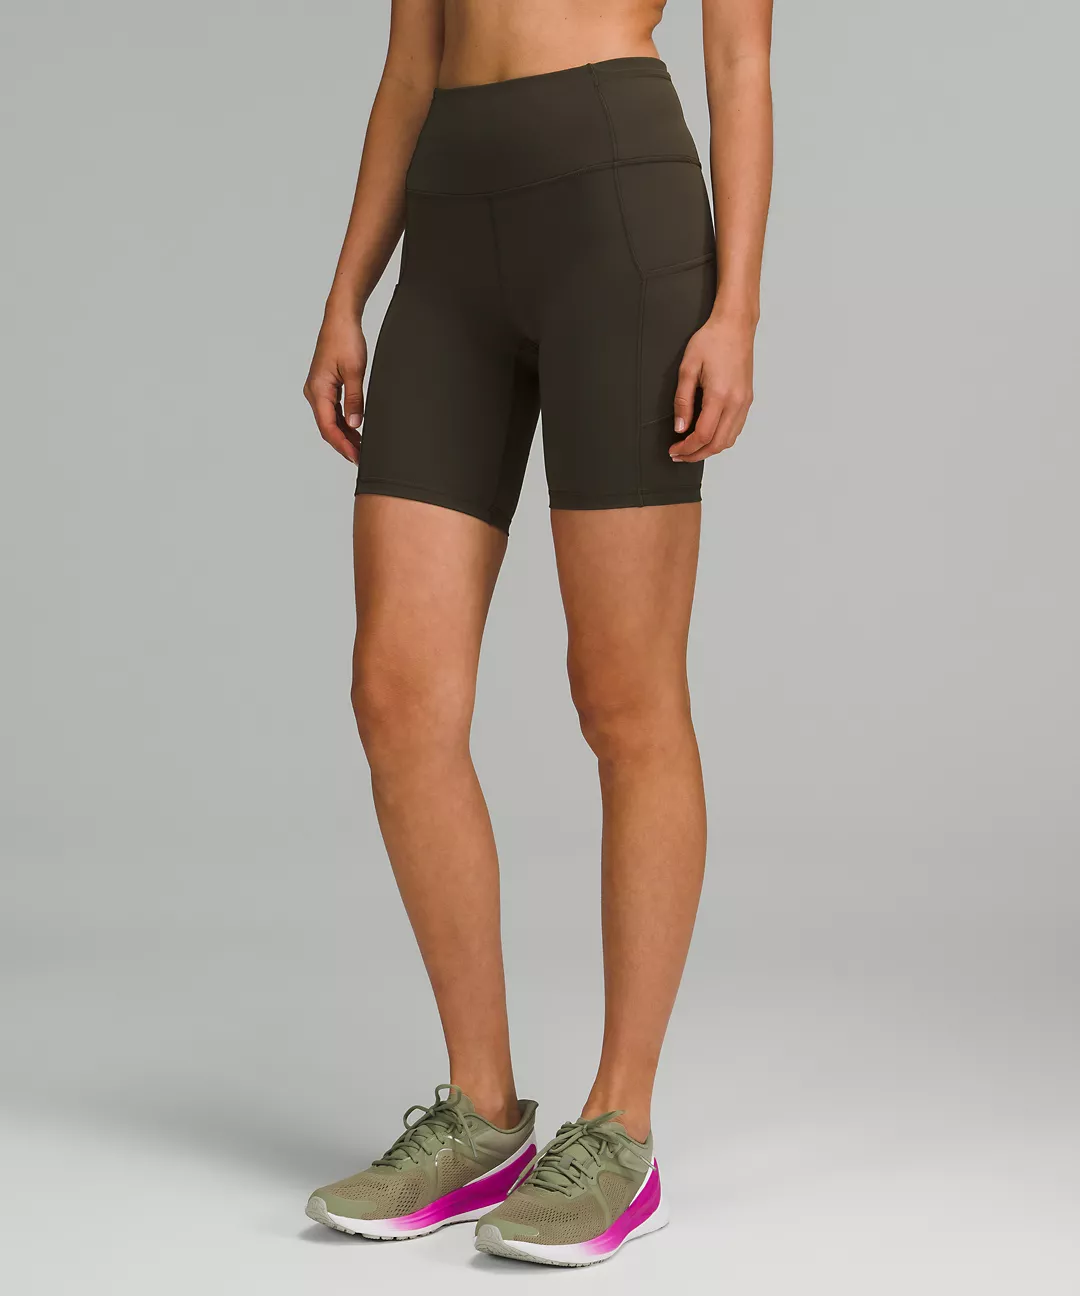 A lululemon Fast and Free High-Rise Short 8"